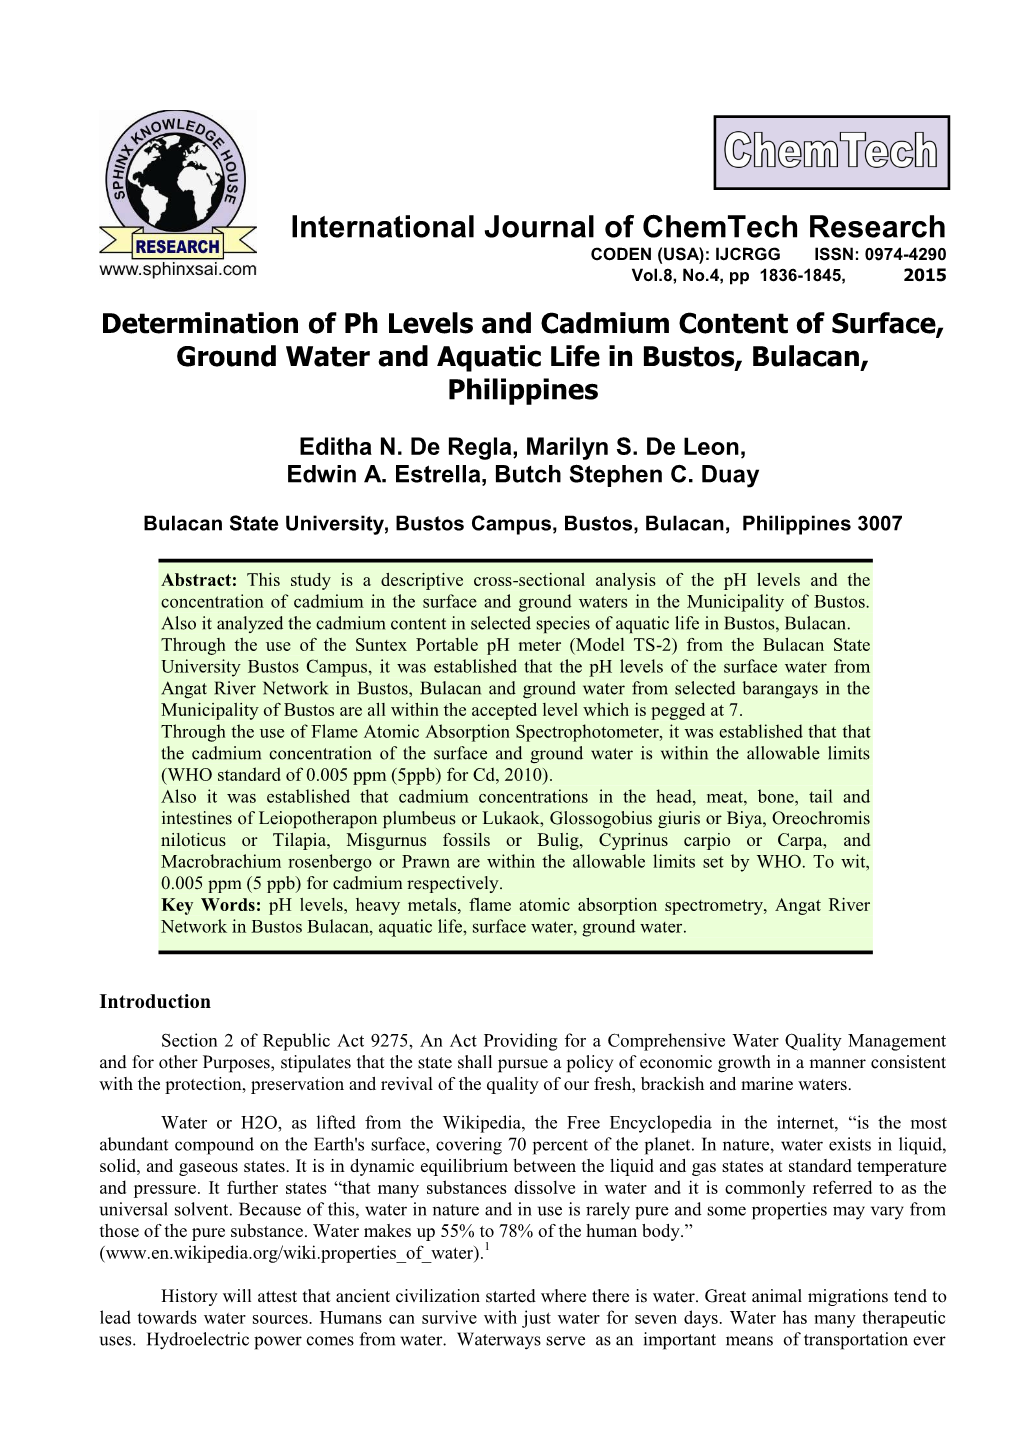 Determination of Ph Levels and Cadmium Content of Surface, Ground Water and Aquatic Life in Bustos, Bulacan, Philippines